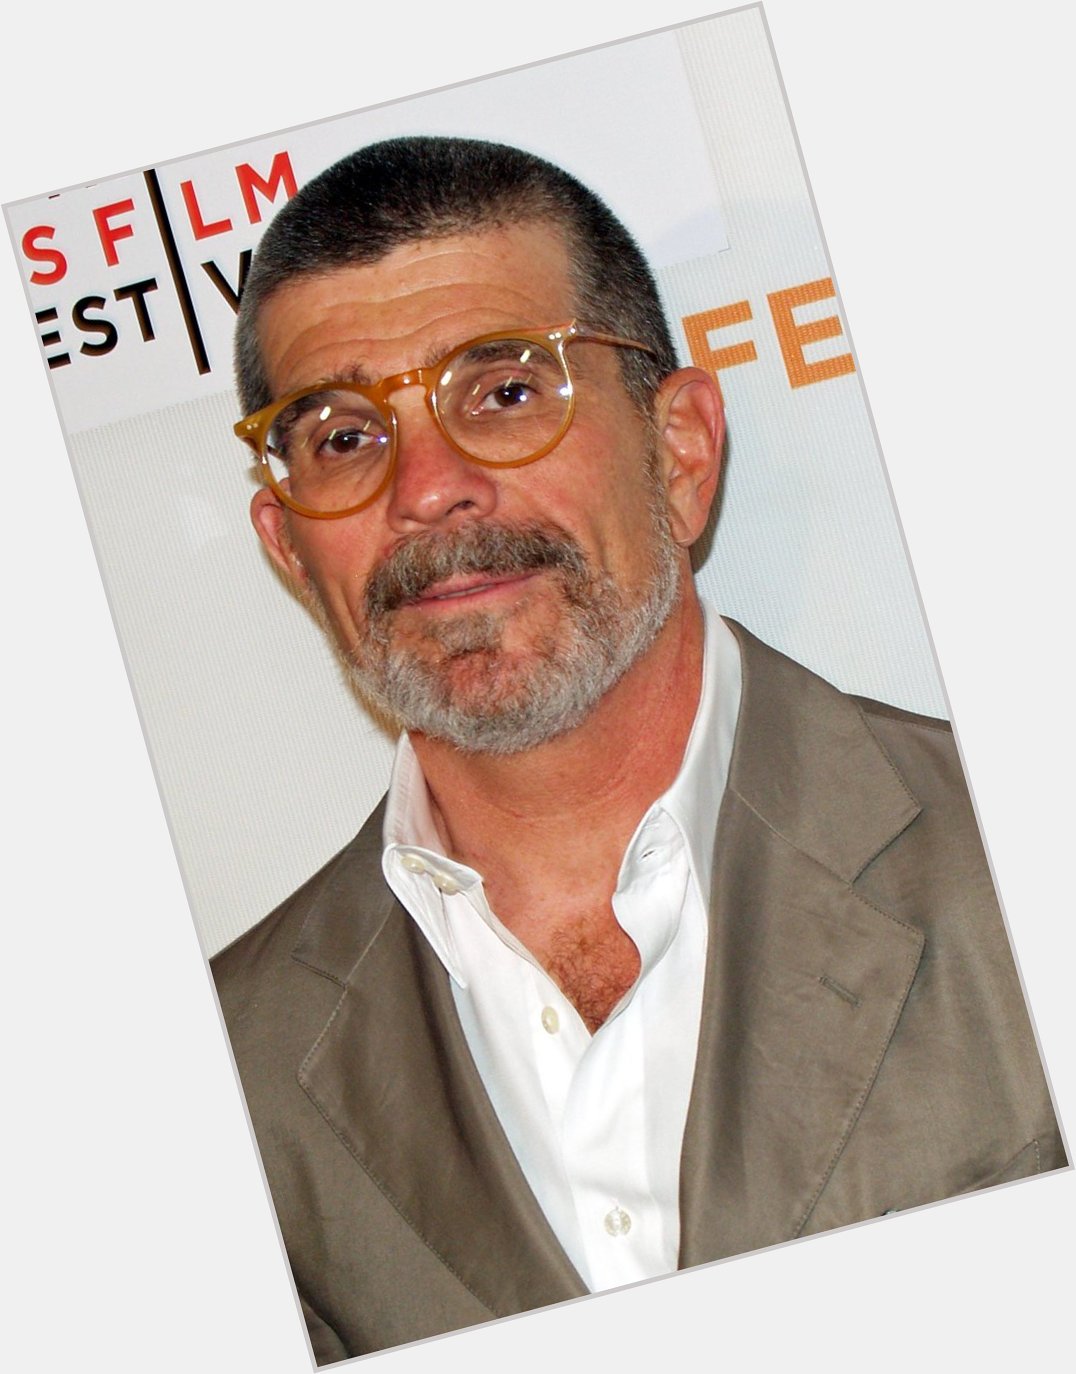 Happy Birthday to David Mamet, writer of \A Wasted Weekend\. 